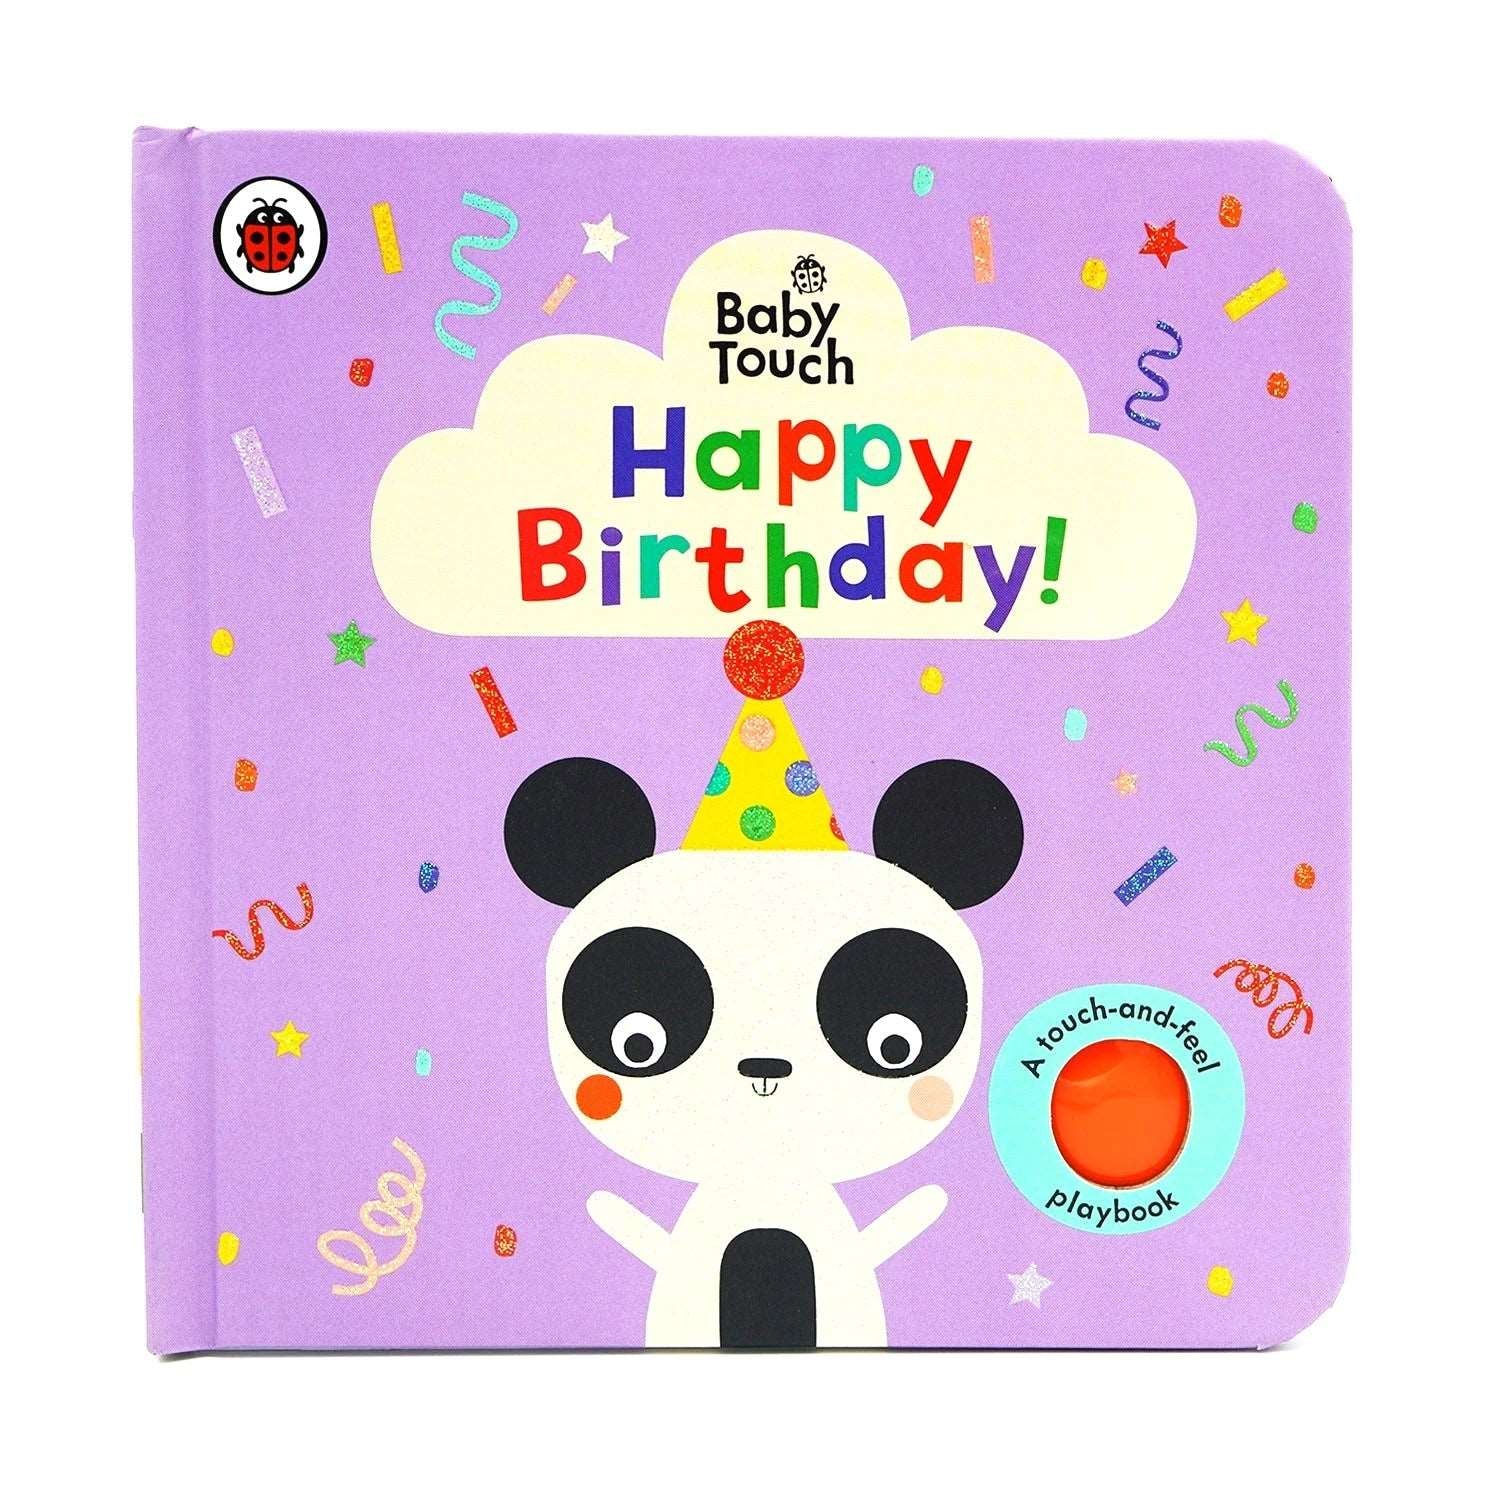 Baby Touch and feel - Board book Happy Birthday!